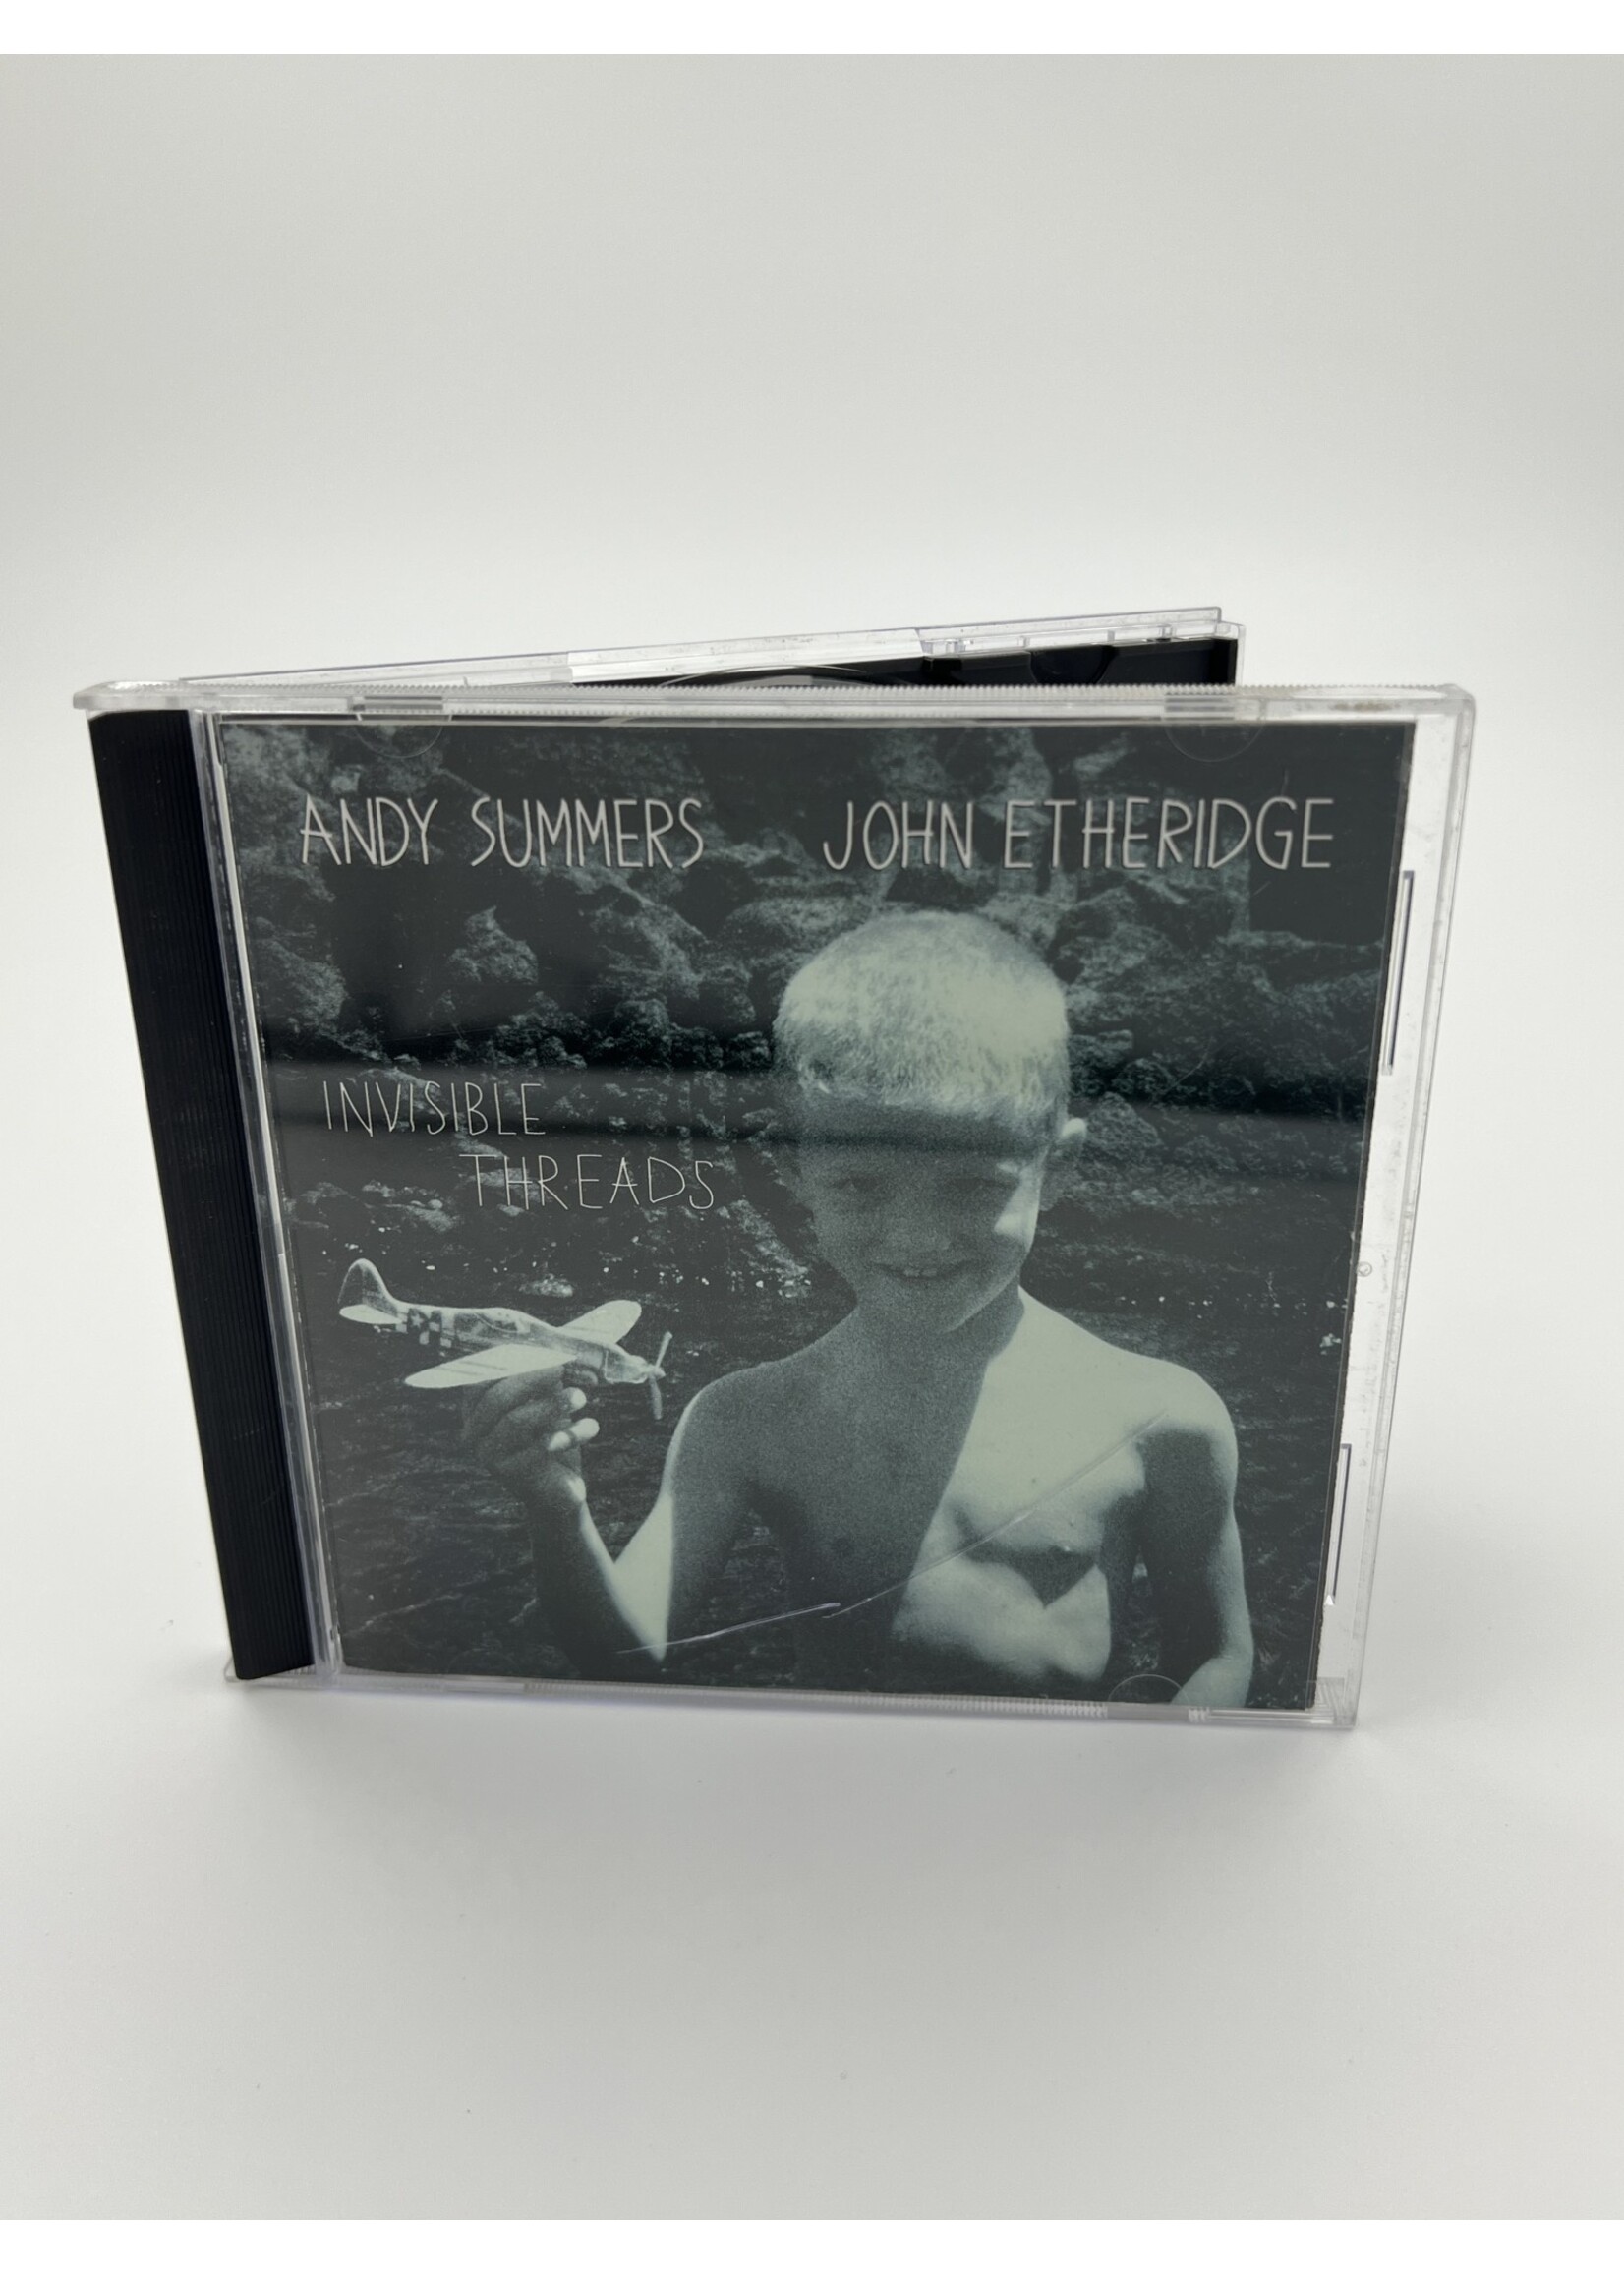 CD Andy Summers John Etheridge Invisible Threads CD